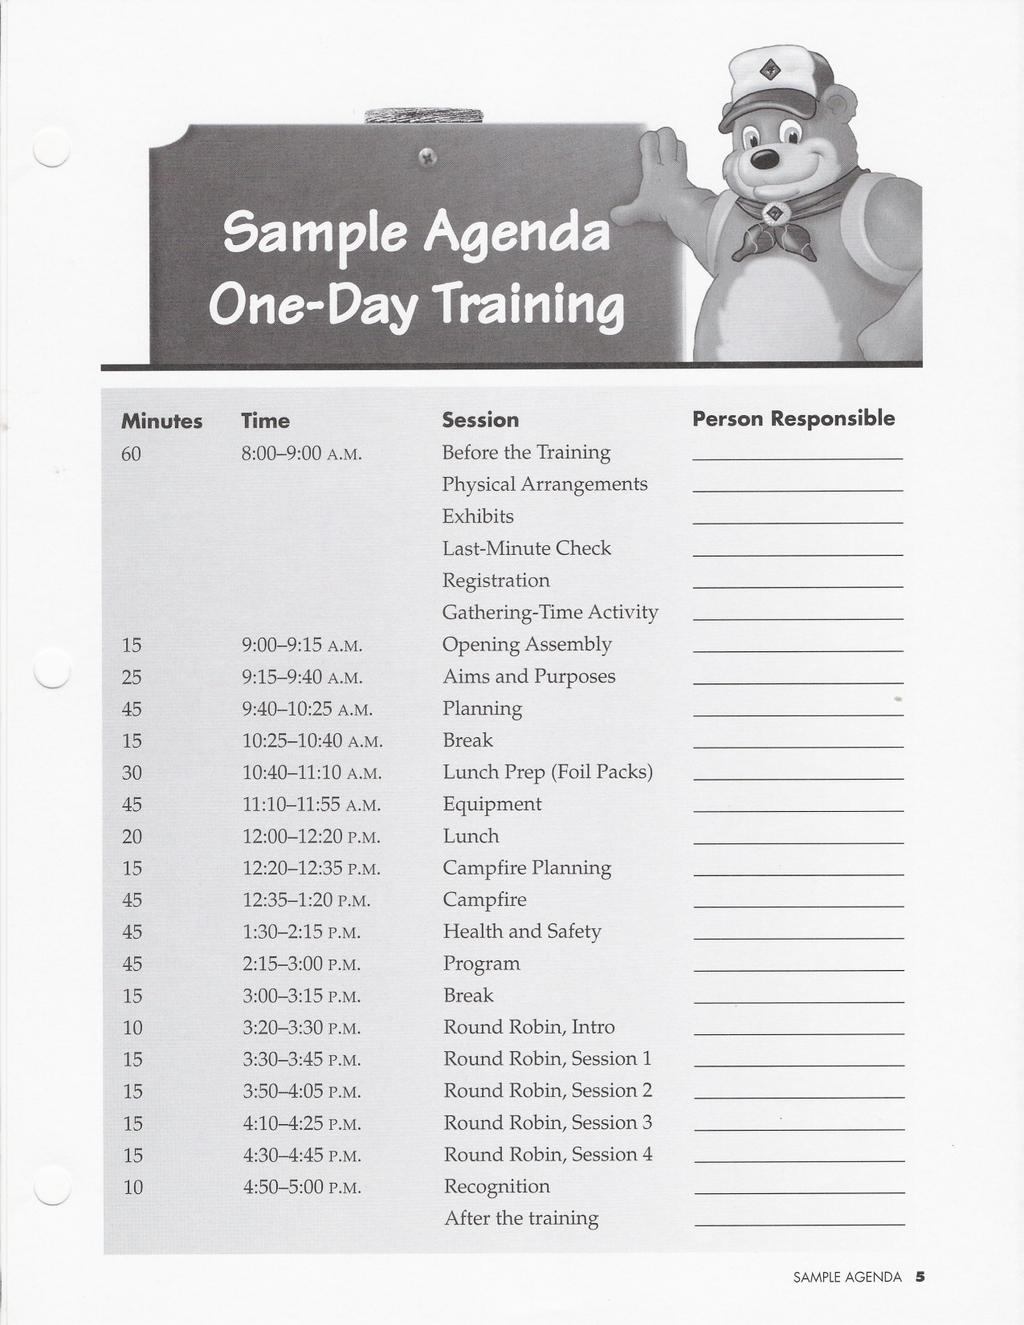 Minutes Time Session Person Responsible 60 8:00-9:00 A.M. Before the Training Physical Arrangements Exhibits Last-Minute Check Registration Gathering-Time Activity 15 9:00-9:15 A.M. Opening Assembly "-- 25 9:15-9:40 A.